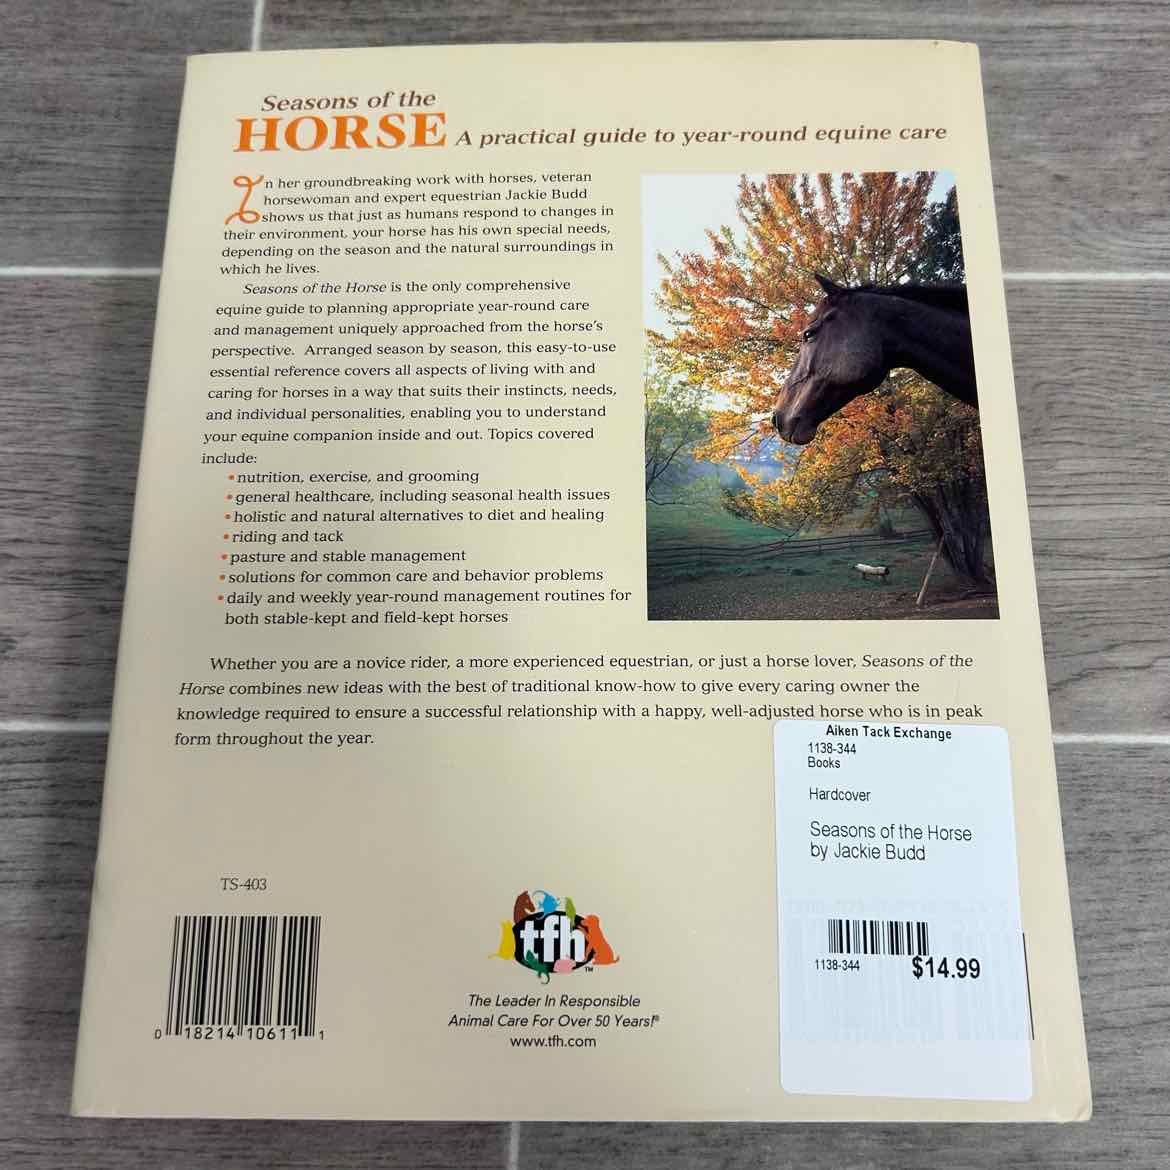 Seasons of the Horse by Jackie Budd